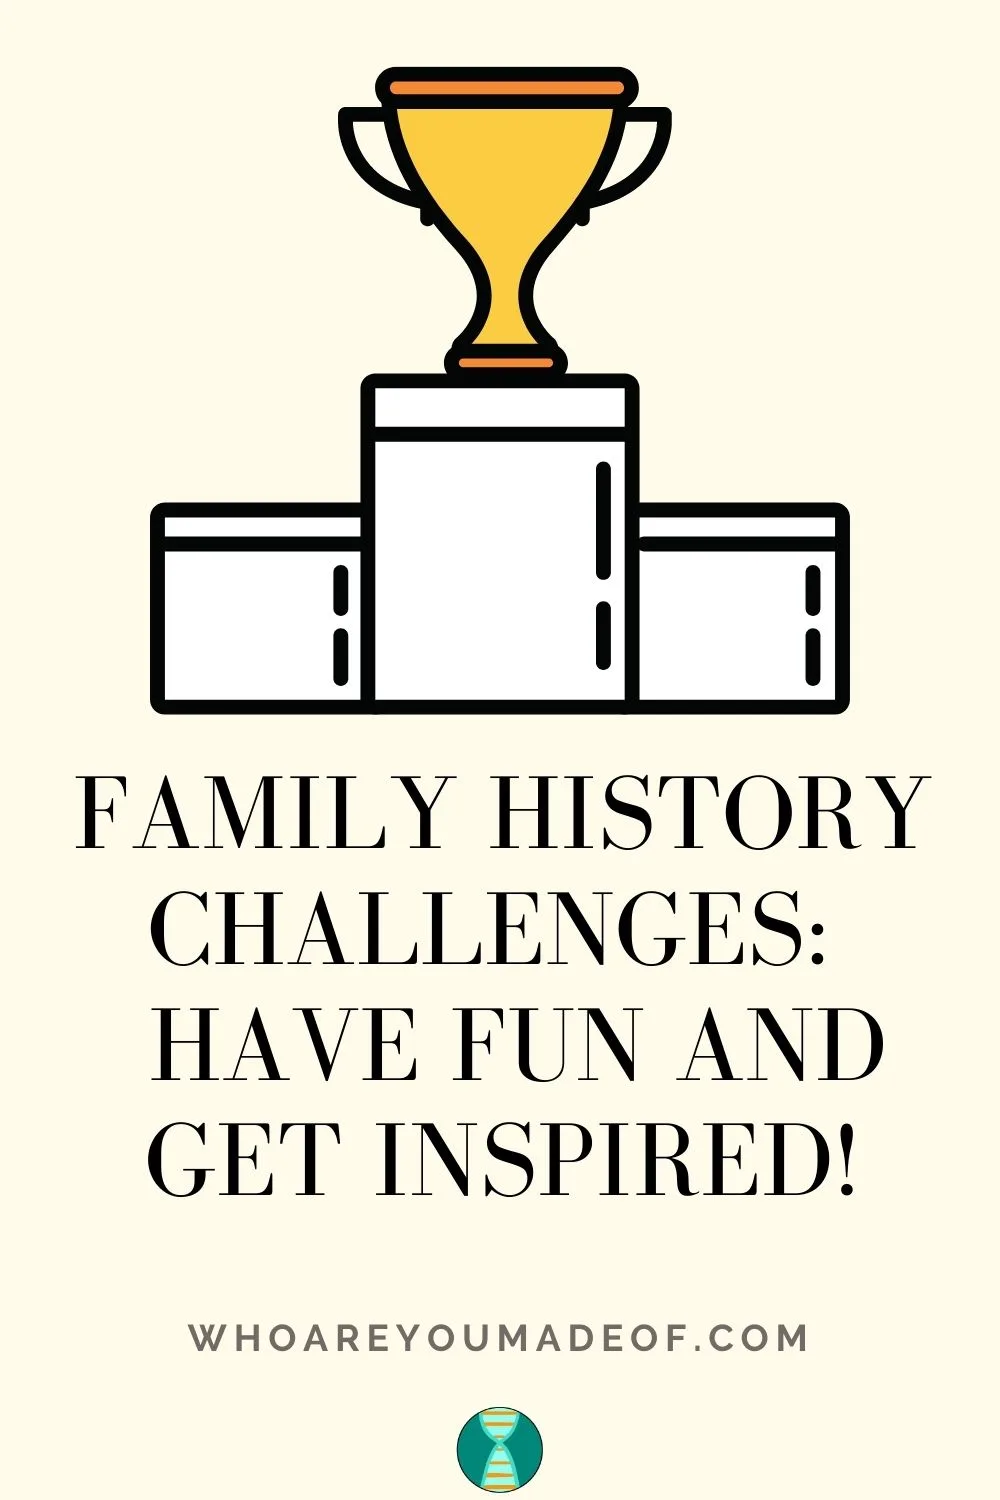 Family History Challenges Have Fun and Get Inspired!  Pinterest graphic